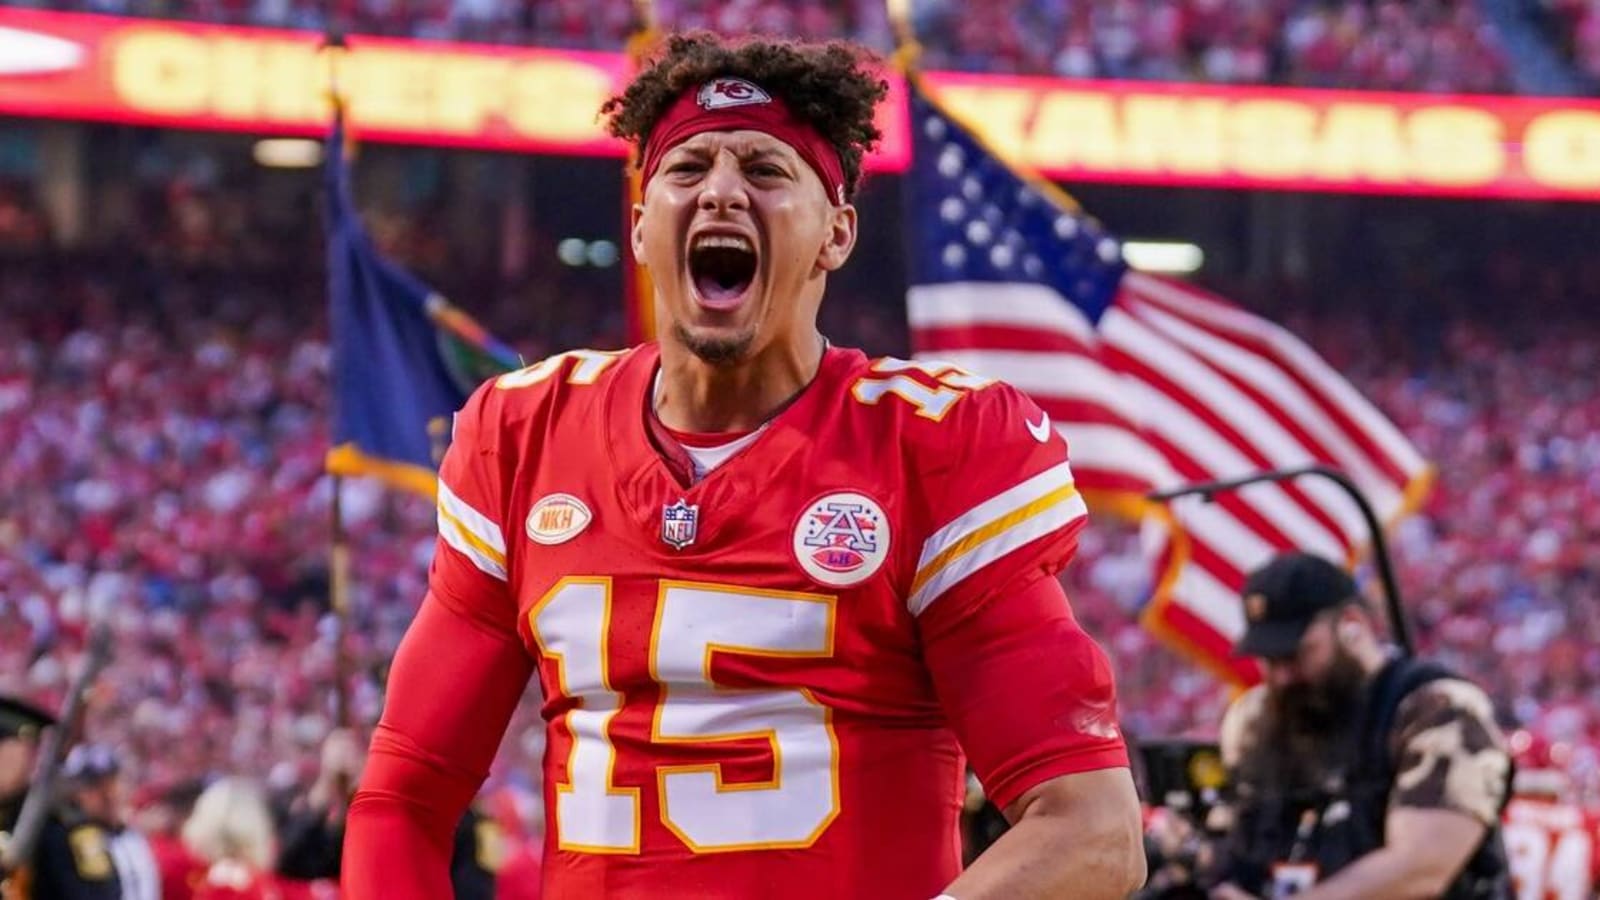 Paul Finebaum: Slow down on calling Patrick Mahomes the greatest of all time